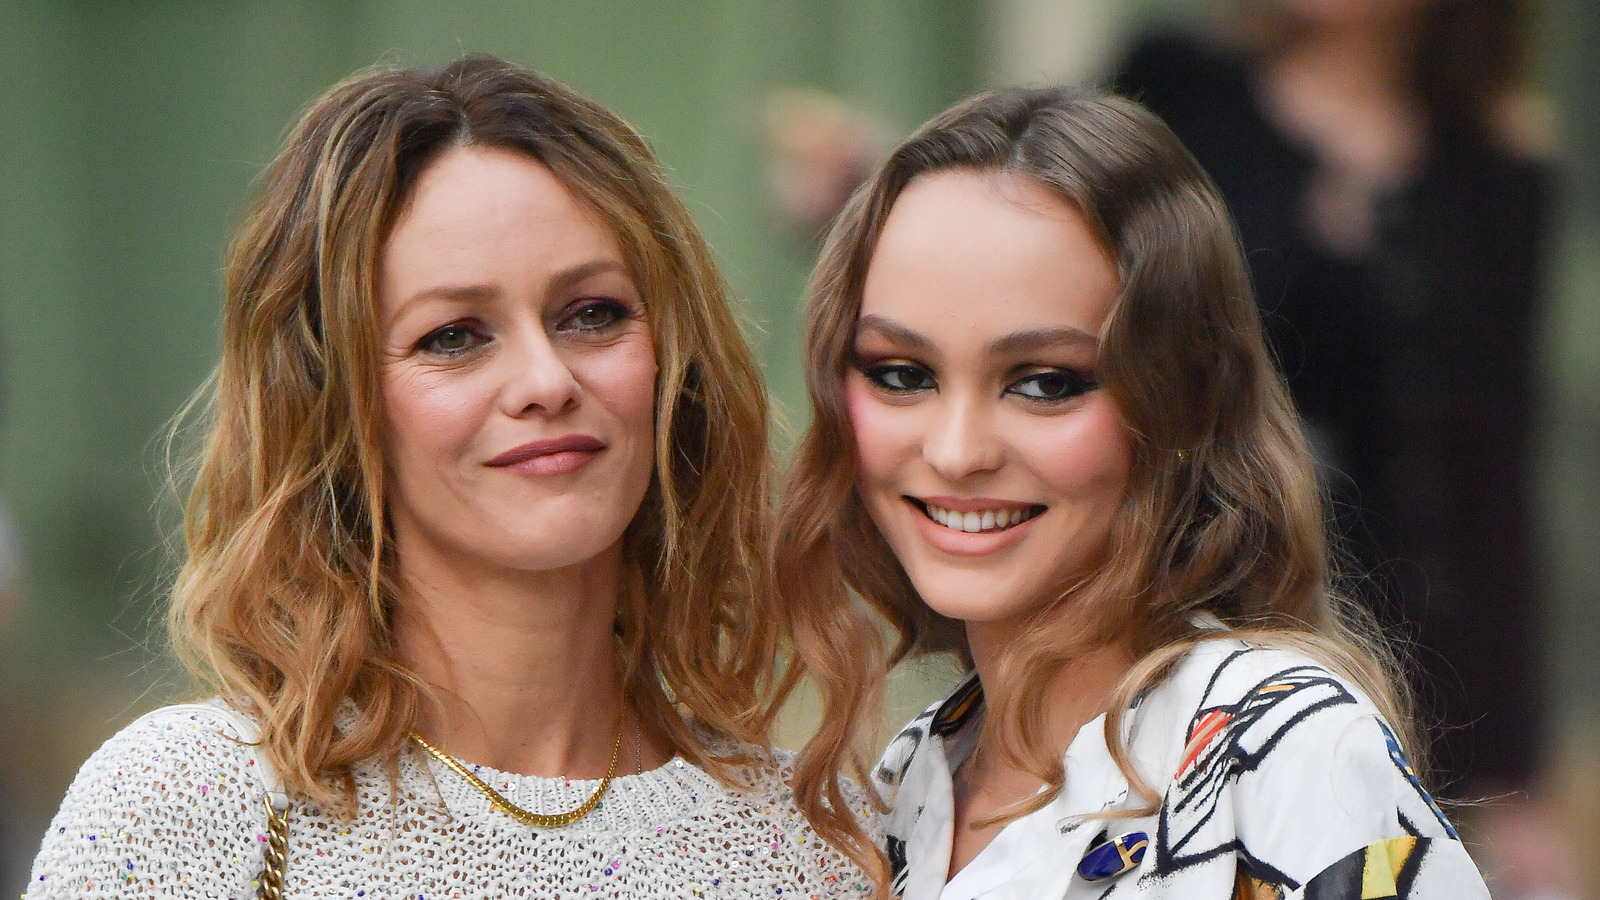 A Look At Lily-Rose Depp's Close Bond With Her Mom Vanessa Paradis